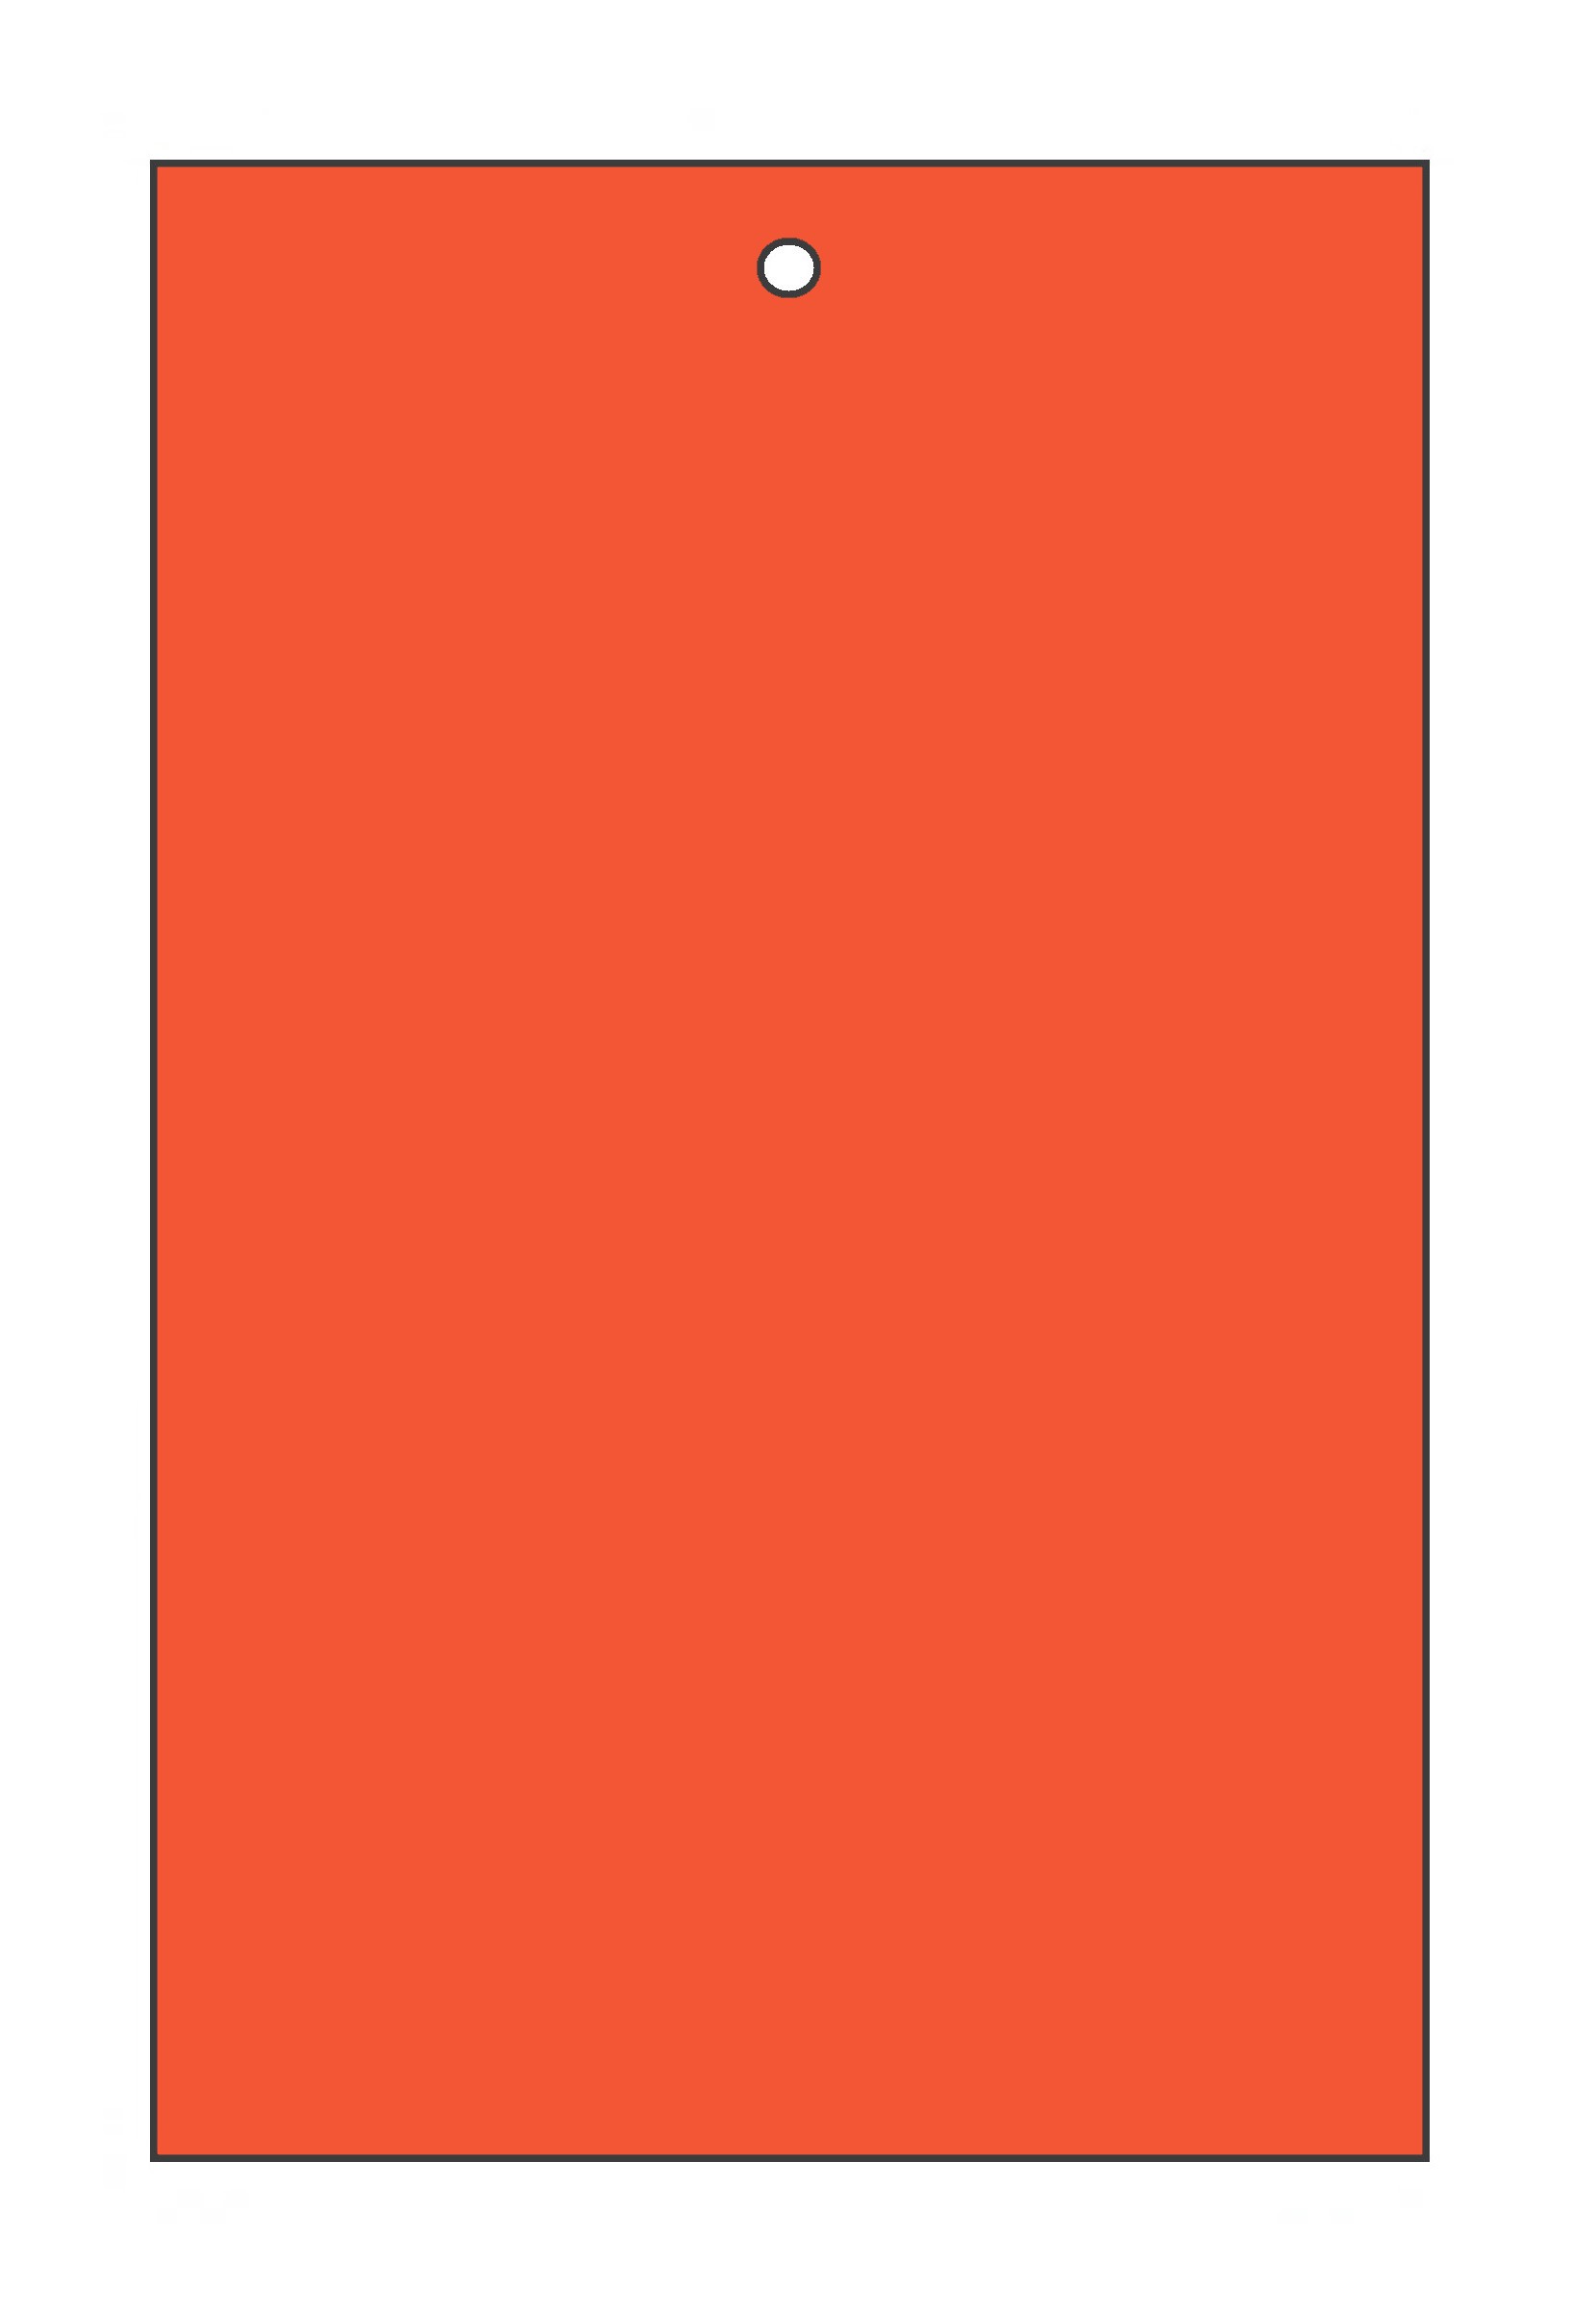 Blank Cards Tags Bright Red Orange Fluorescent with hole, no string